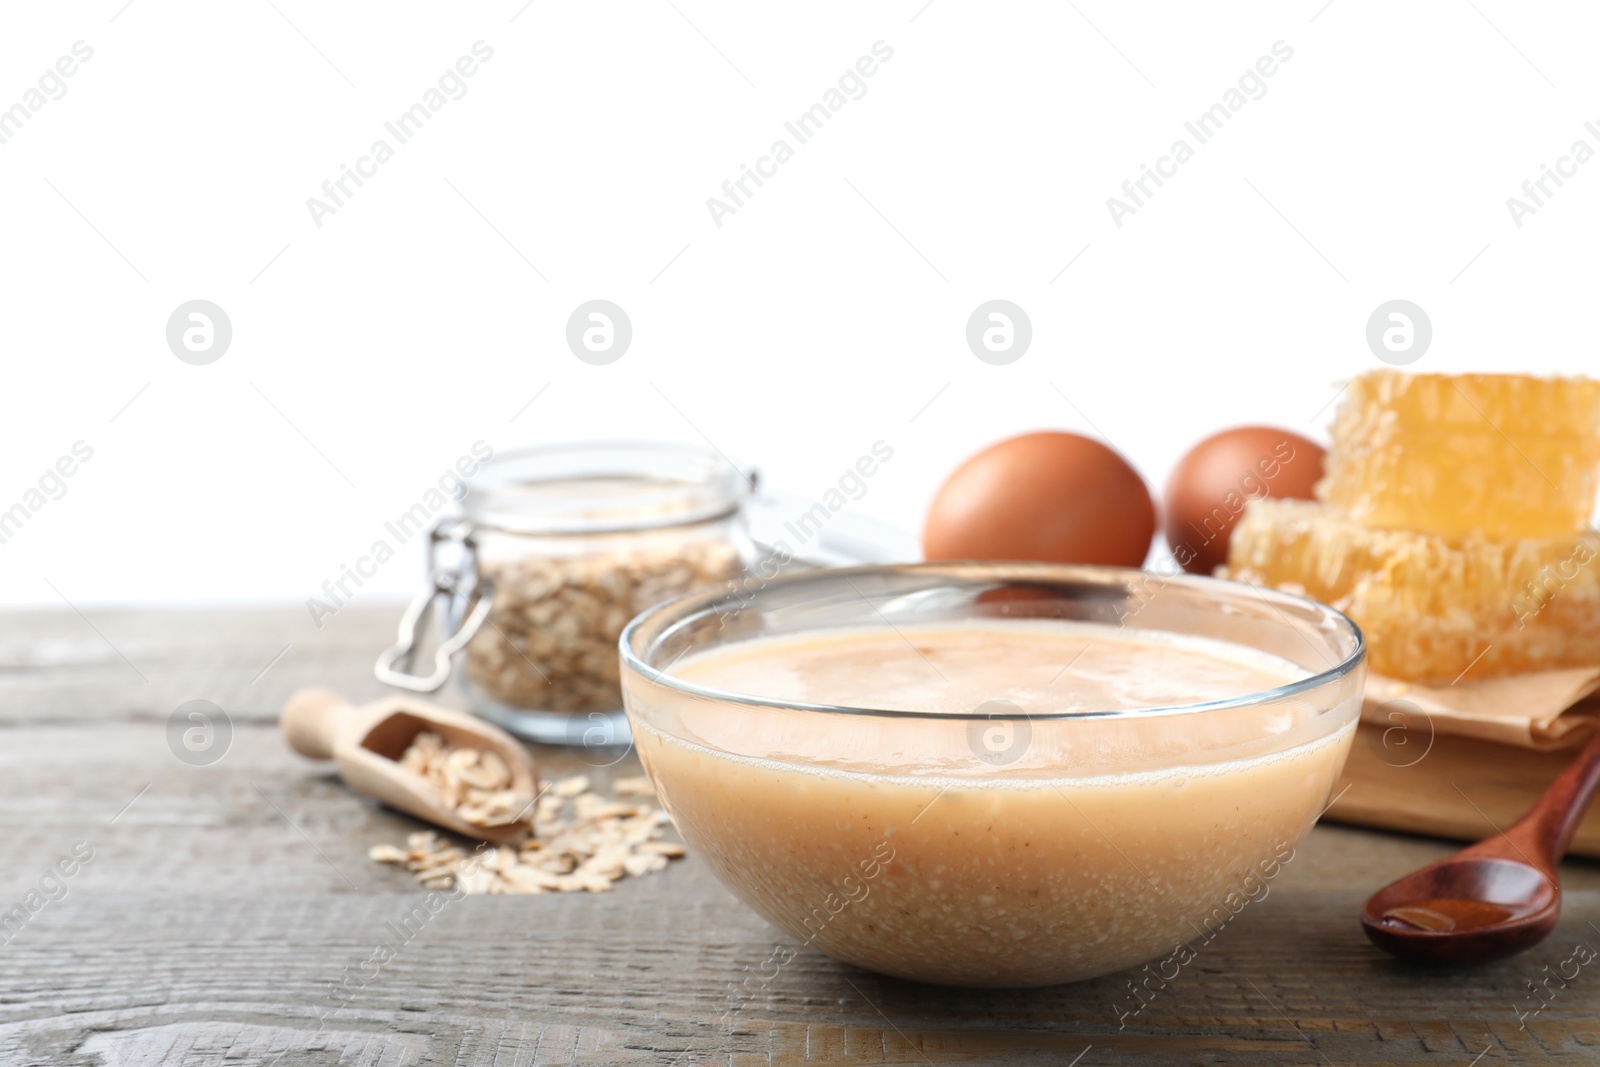 Photo of Homemade hair mask in bowl and fresh ingredients on wooden table against white background. Space for text